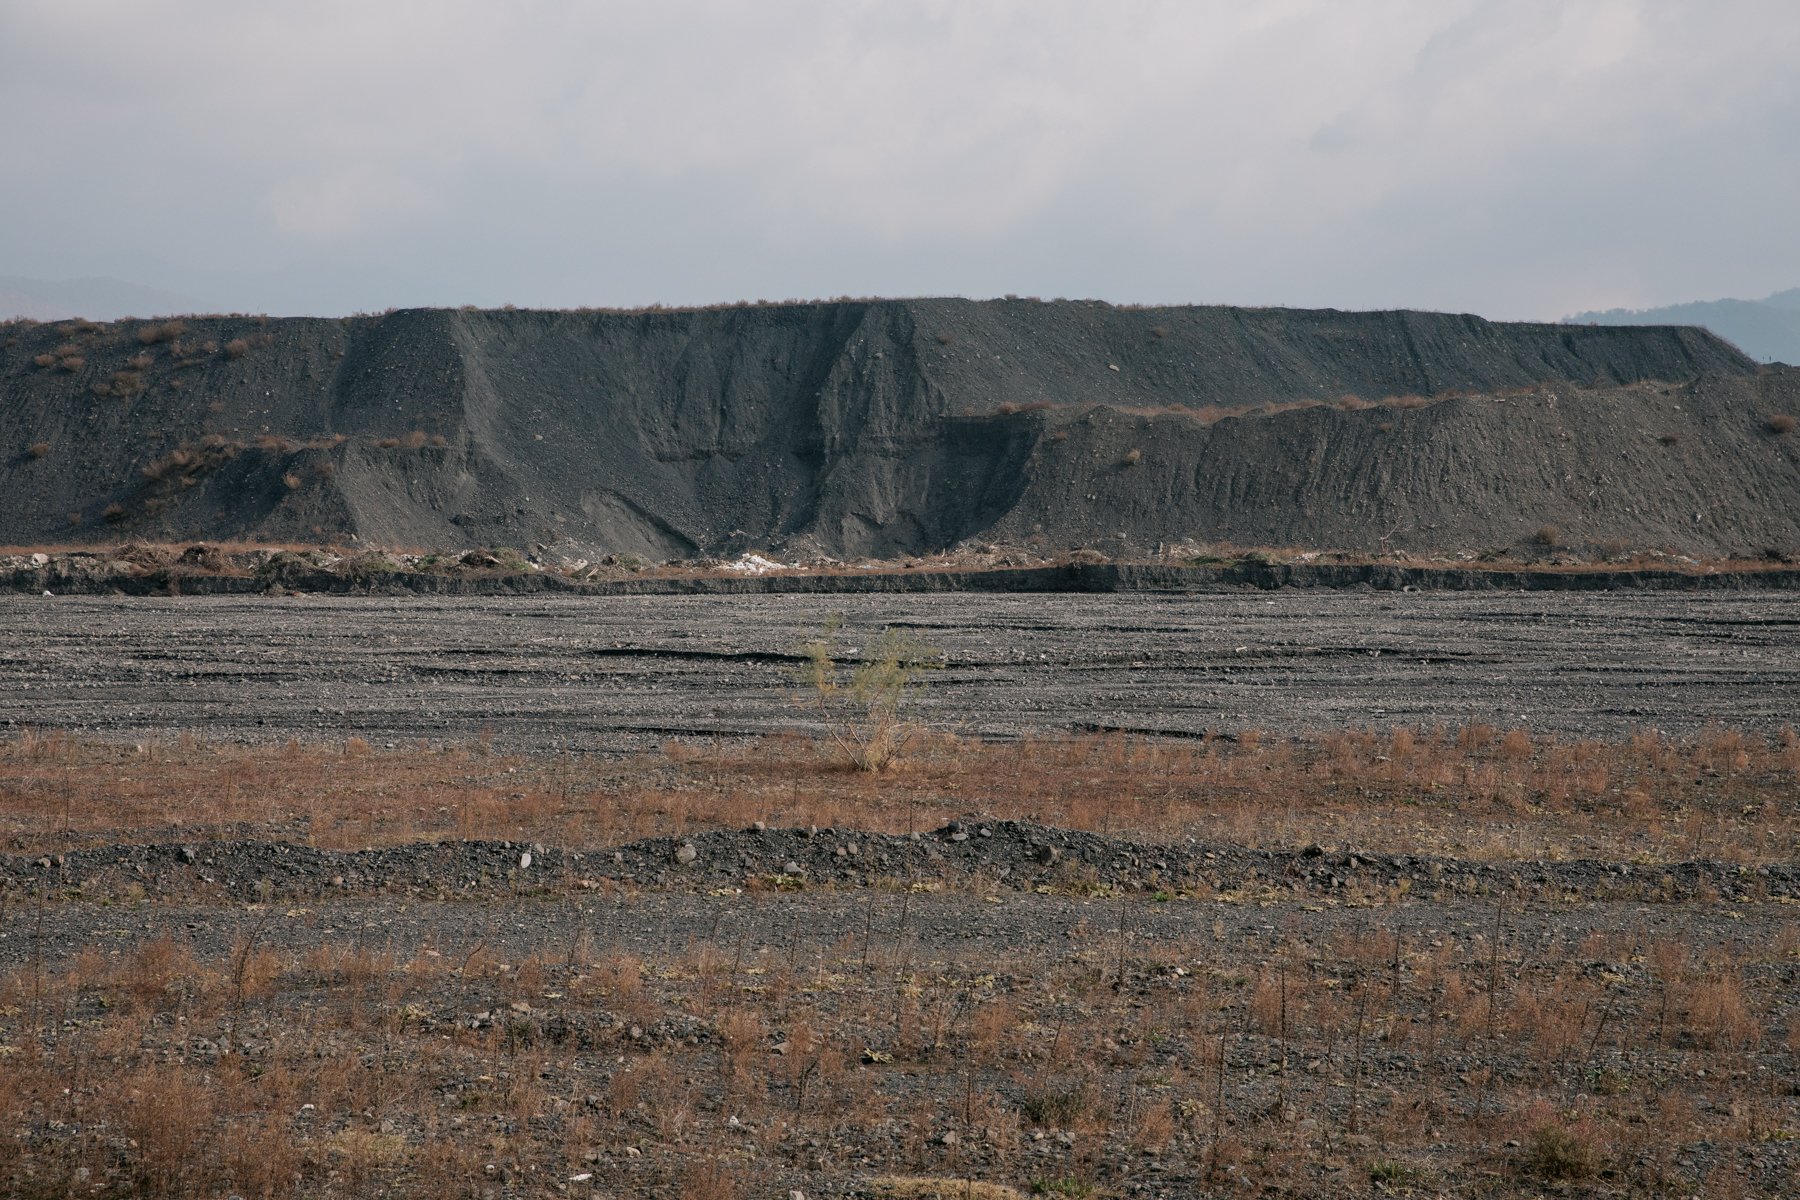  A quarry on the east bank of the Duruji River near Kvareli. Gravel quarrying is a major industry in the region. 